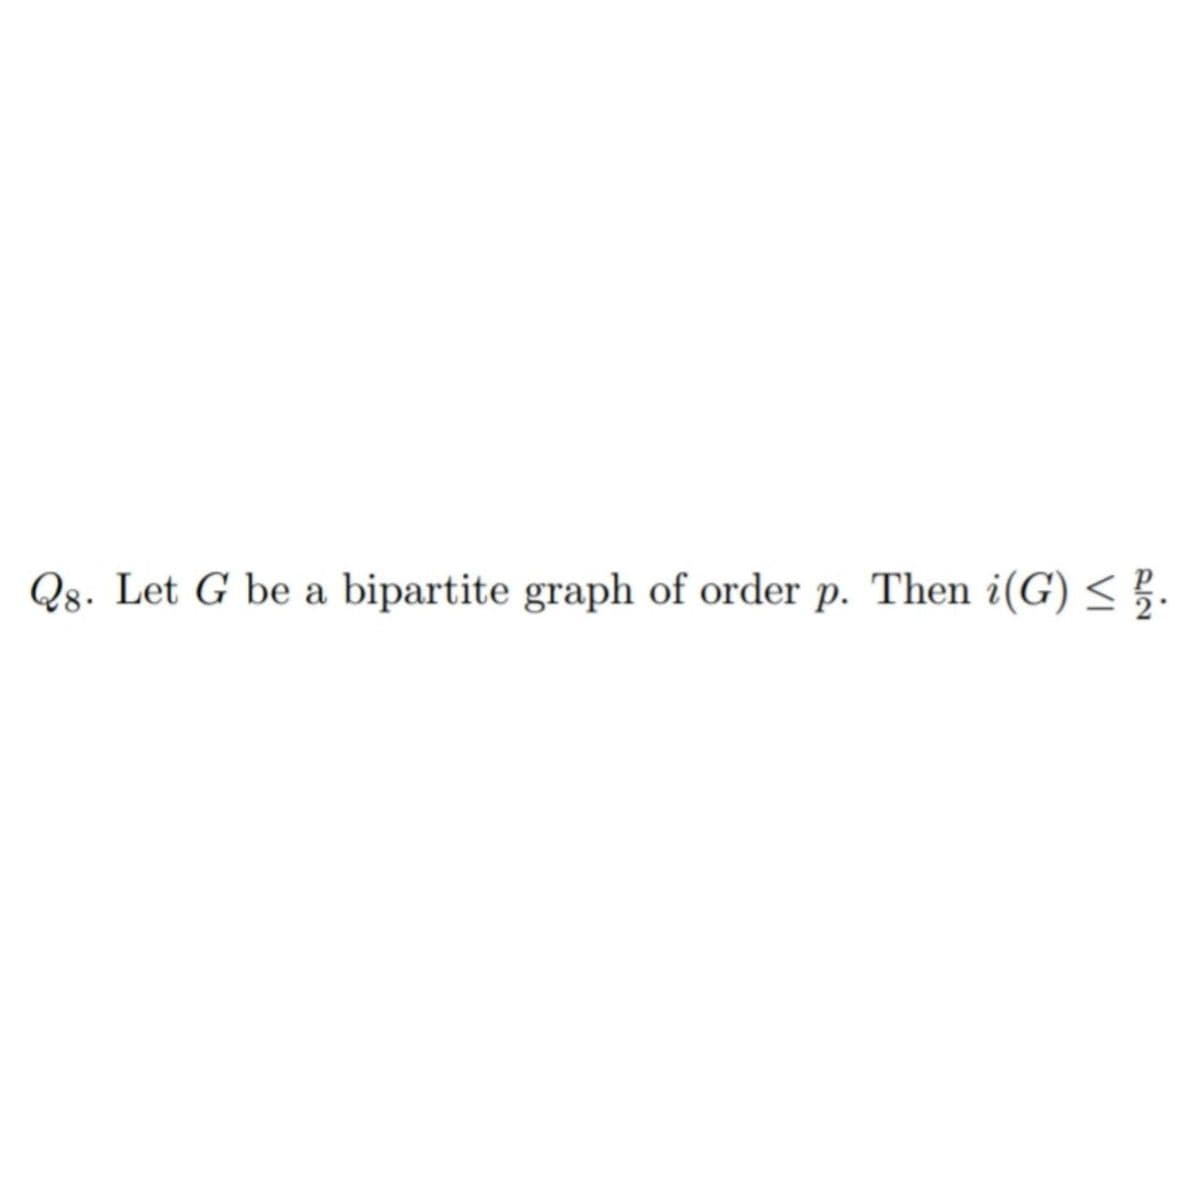 Q8. Let G be a bipartite graph of order p. Then i(G) ≤ 2.